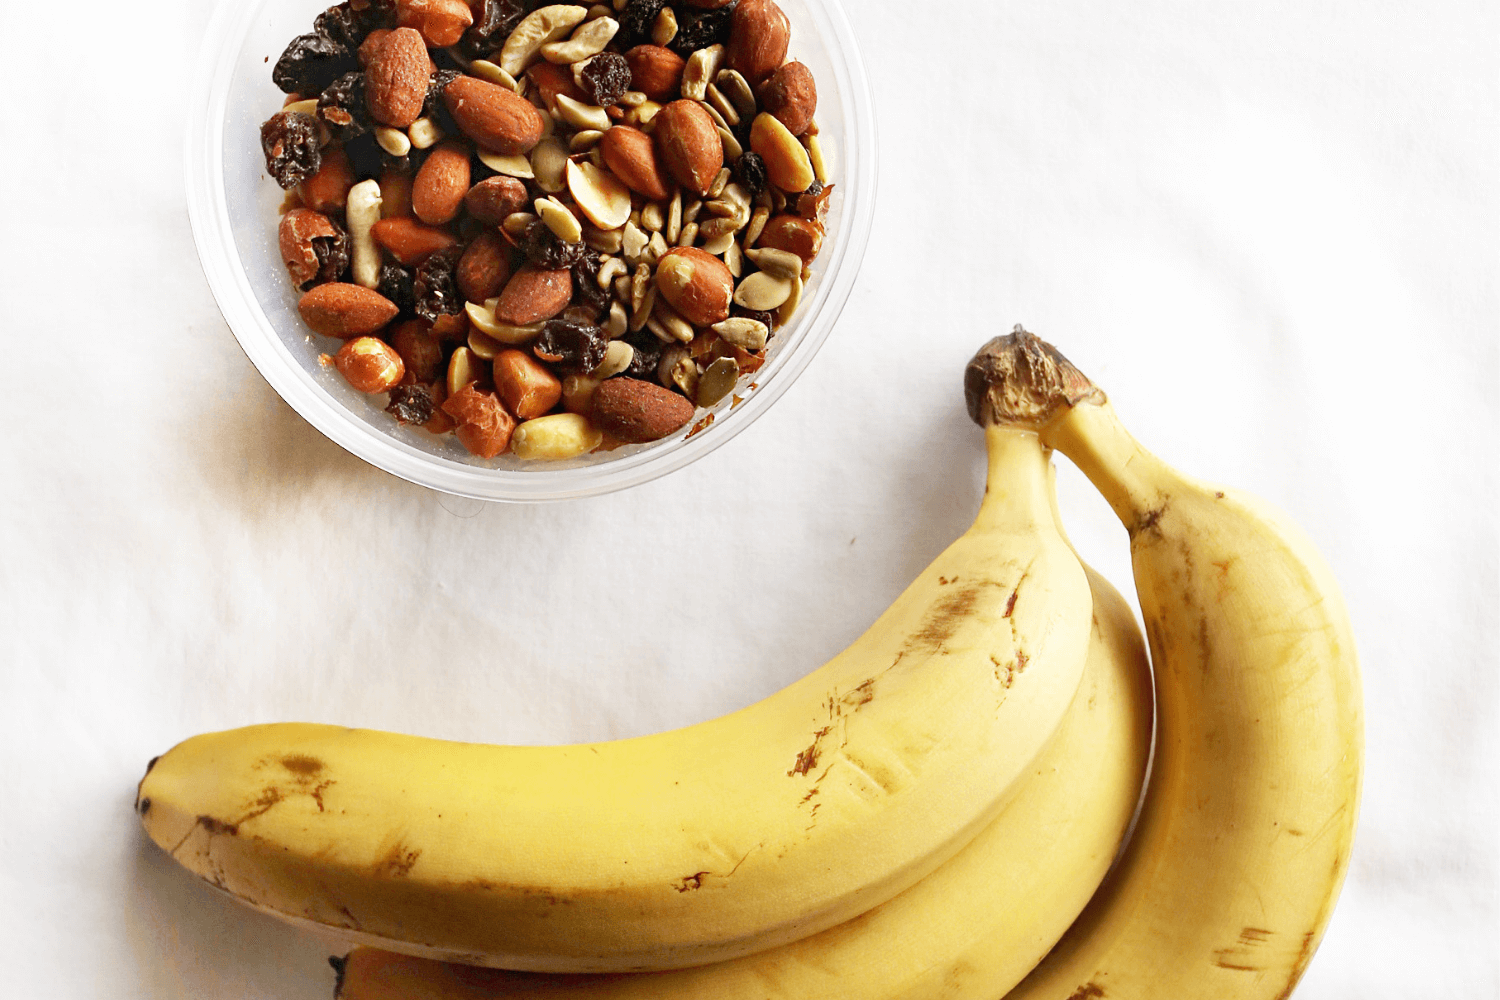 20 Meal Ideas to Support Student-Athletes: Trail Mix with Banana